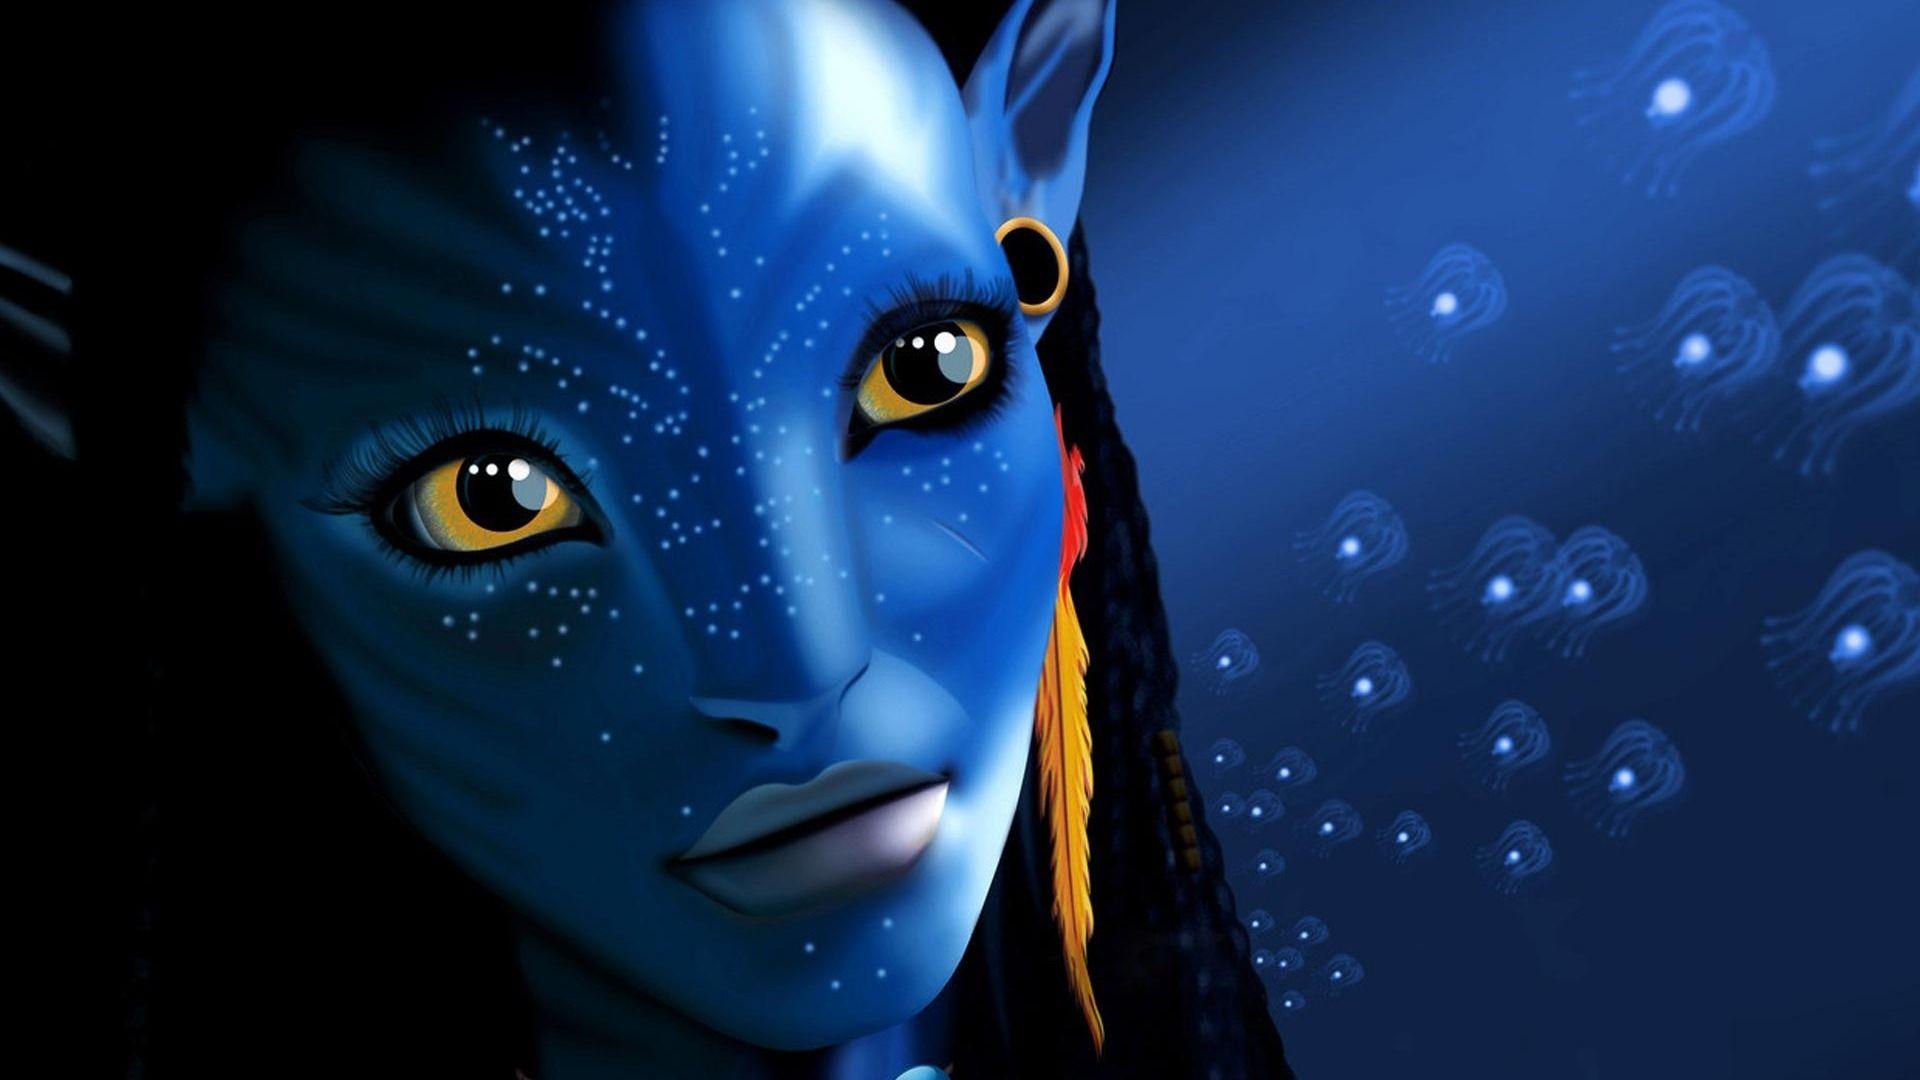 Wallpaper Avatar 2 The Way of Water 4k trailer Movies 23985